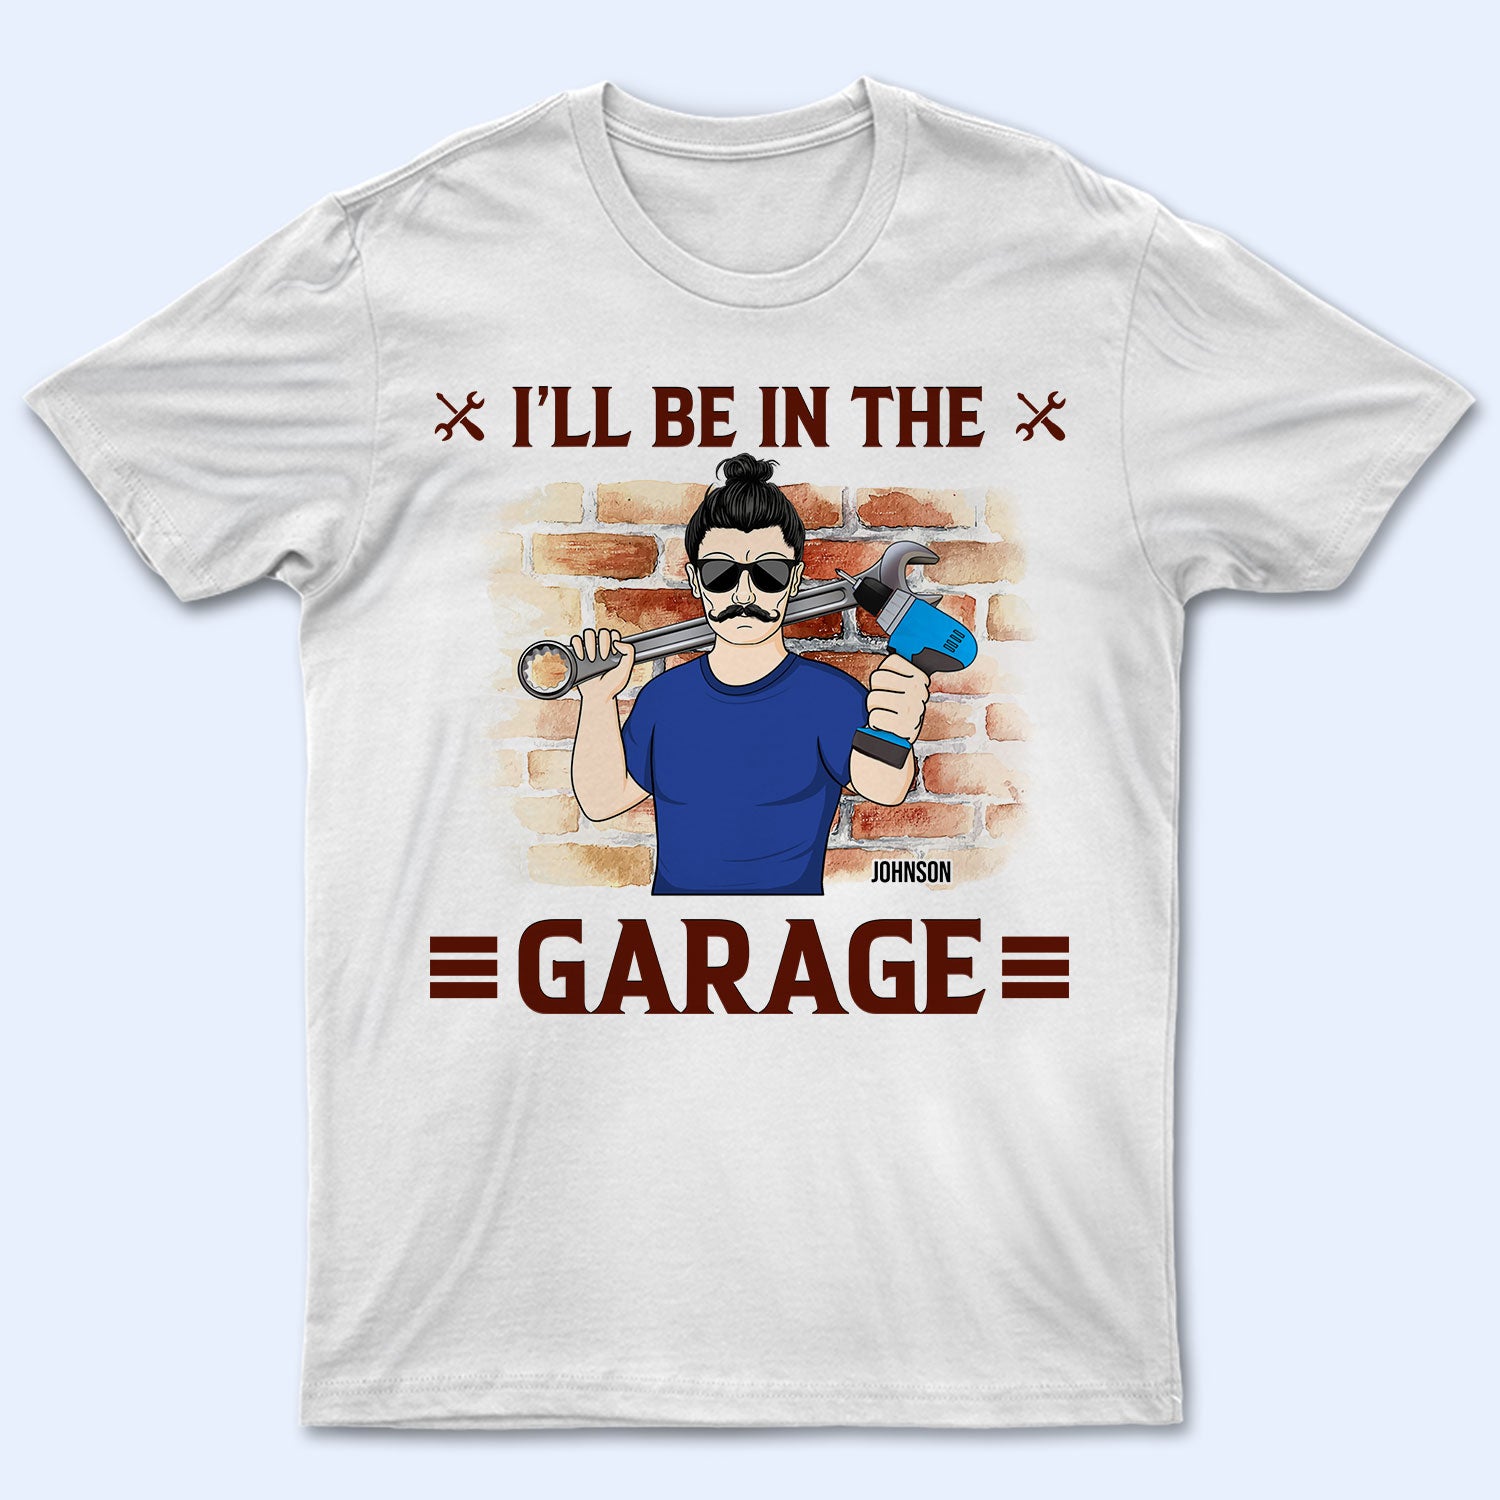 I'll Be In The Garage - Gift for Dad, Father - Personalized Custom T Shirt